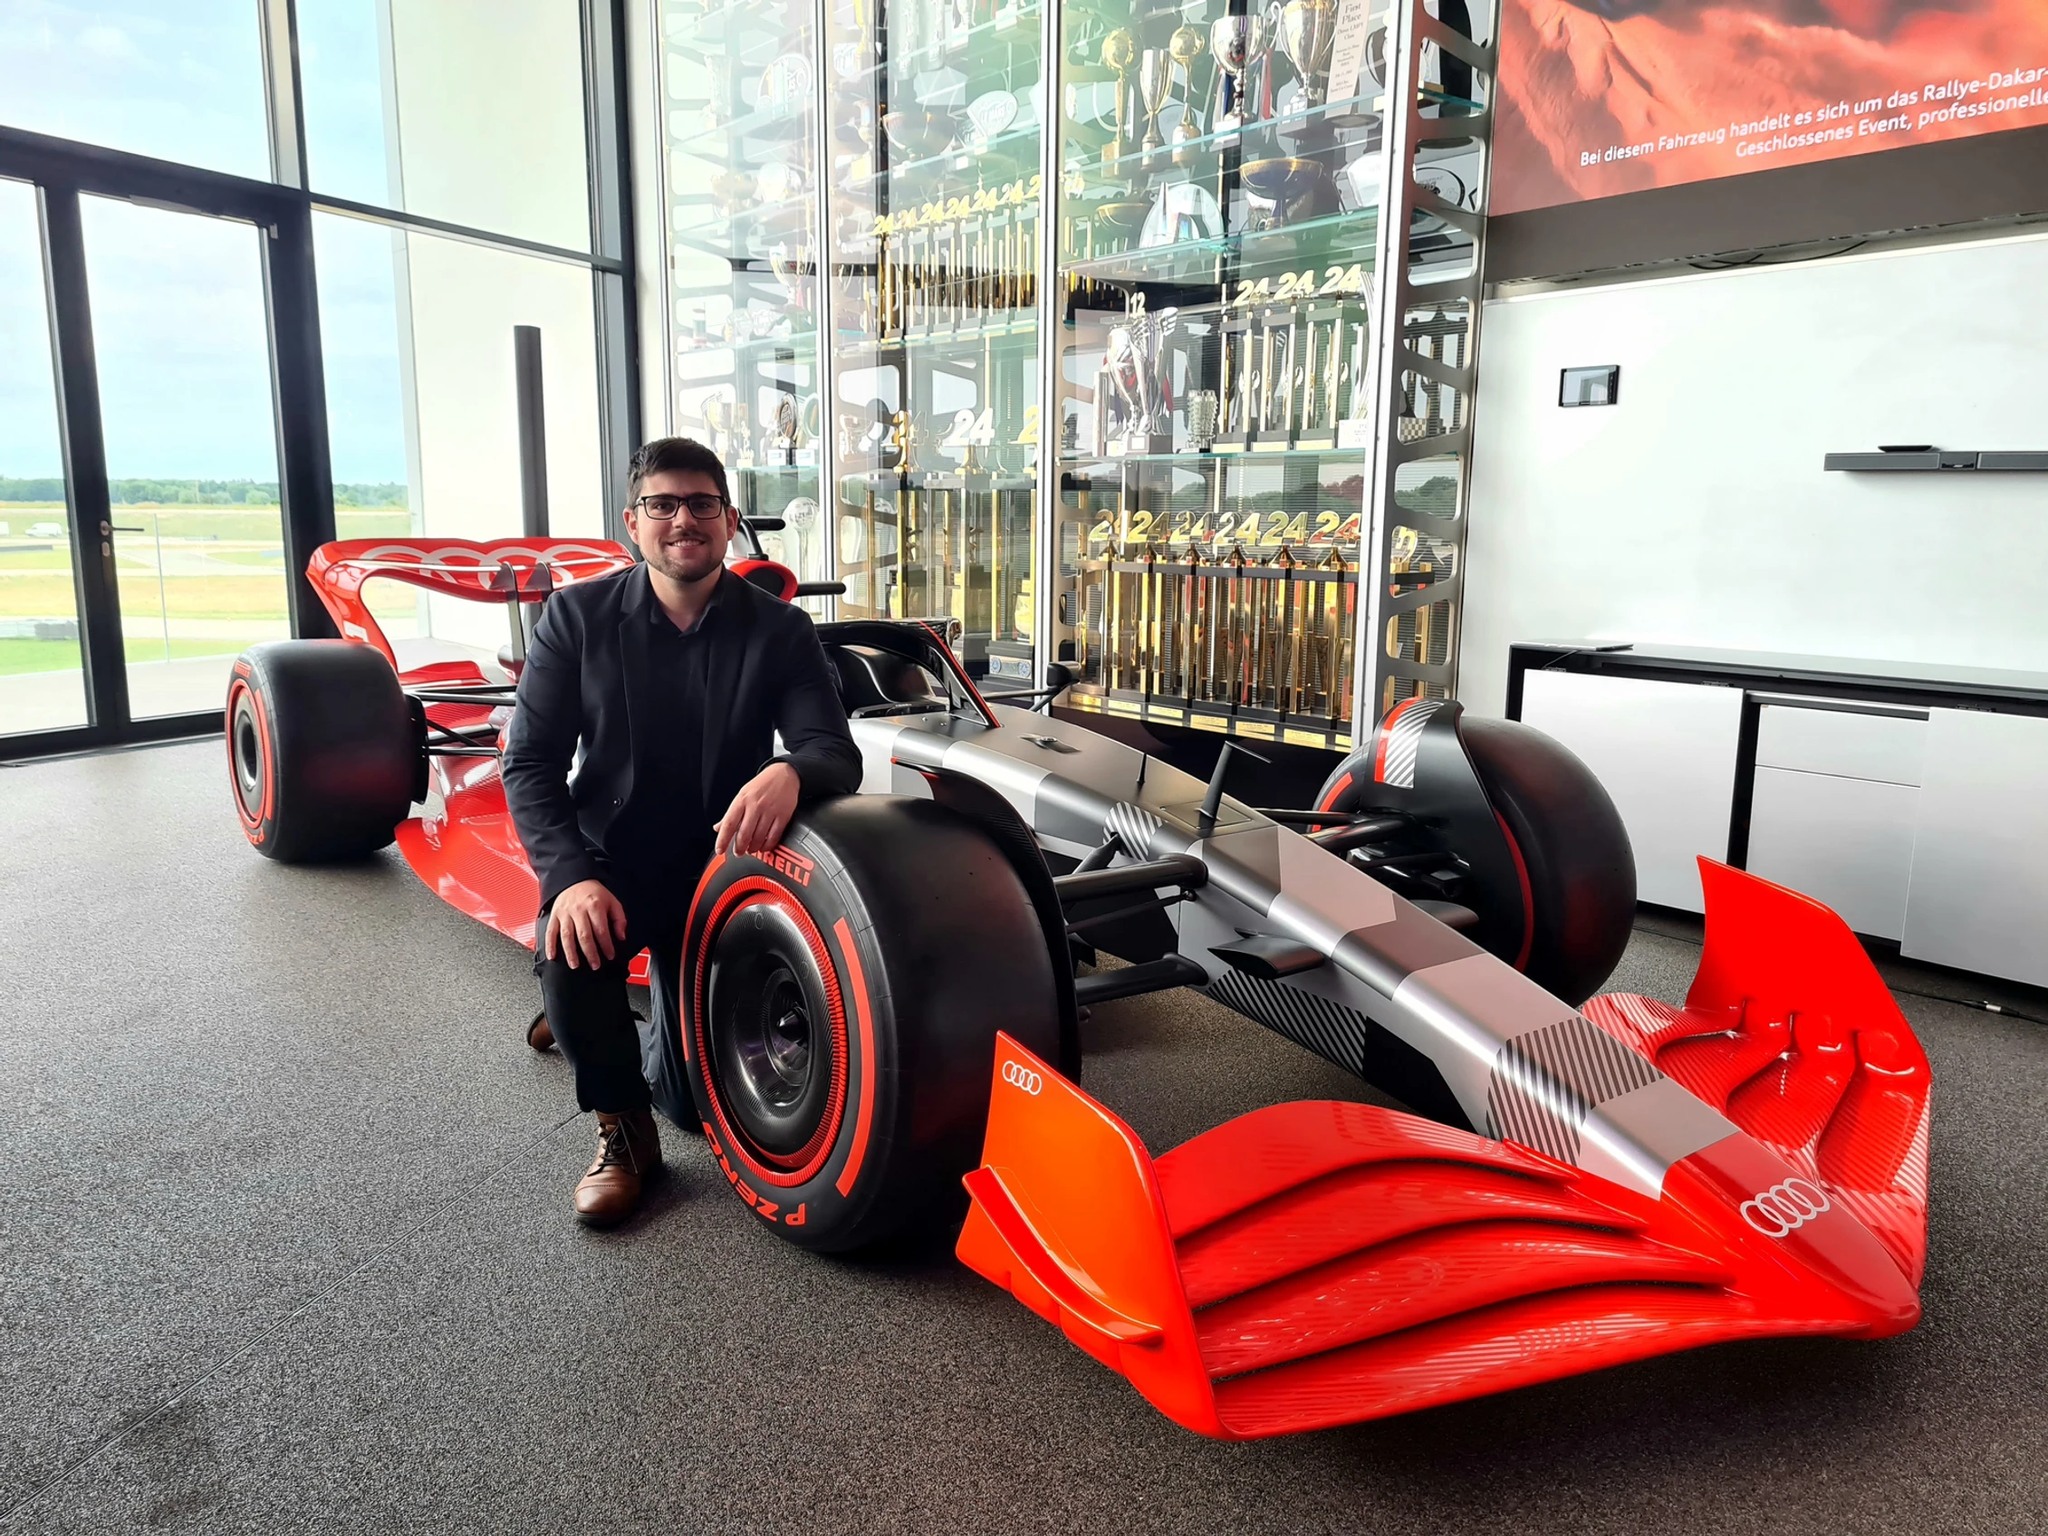 A former student of István Széchenyi University, he is a member of the Audi Formula 1 resource development team